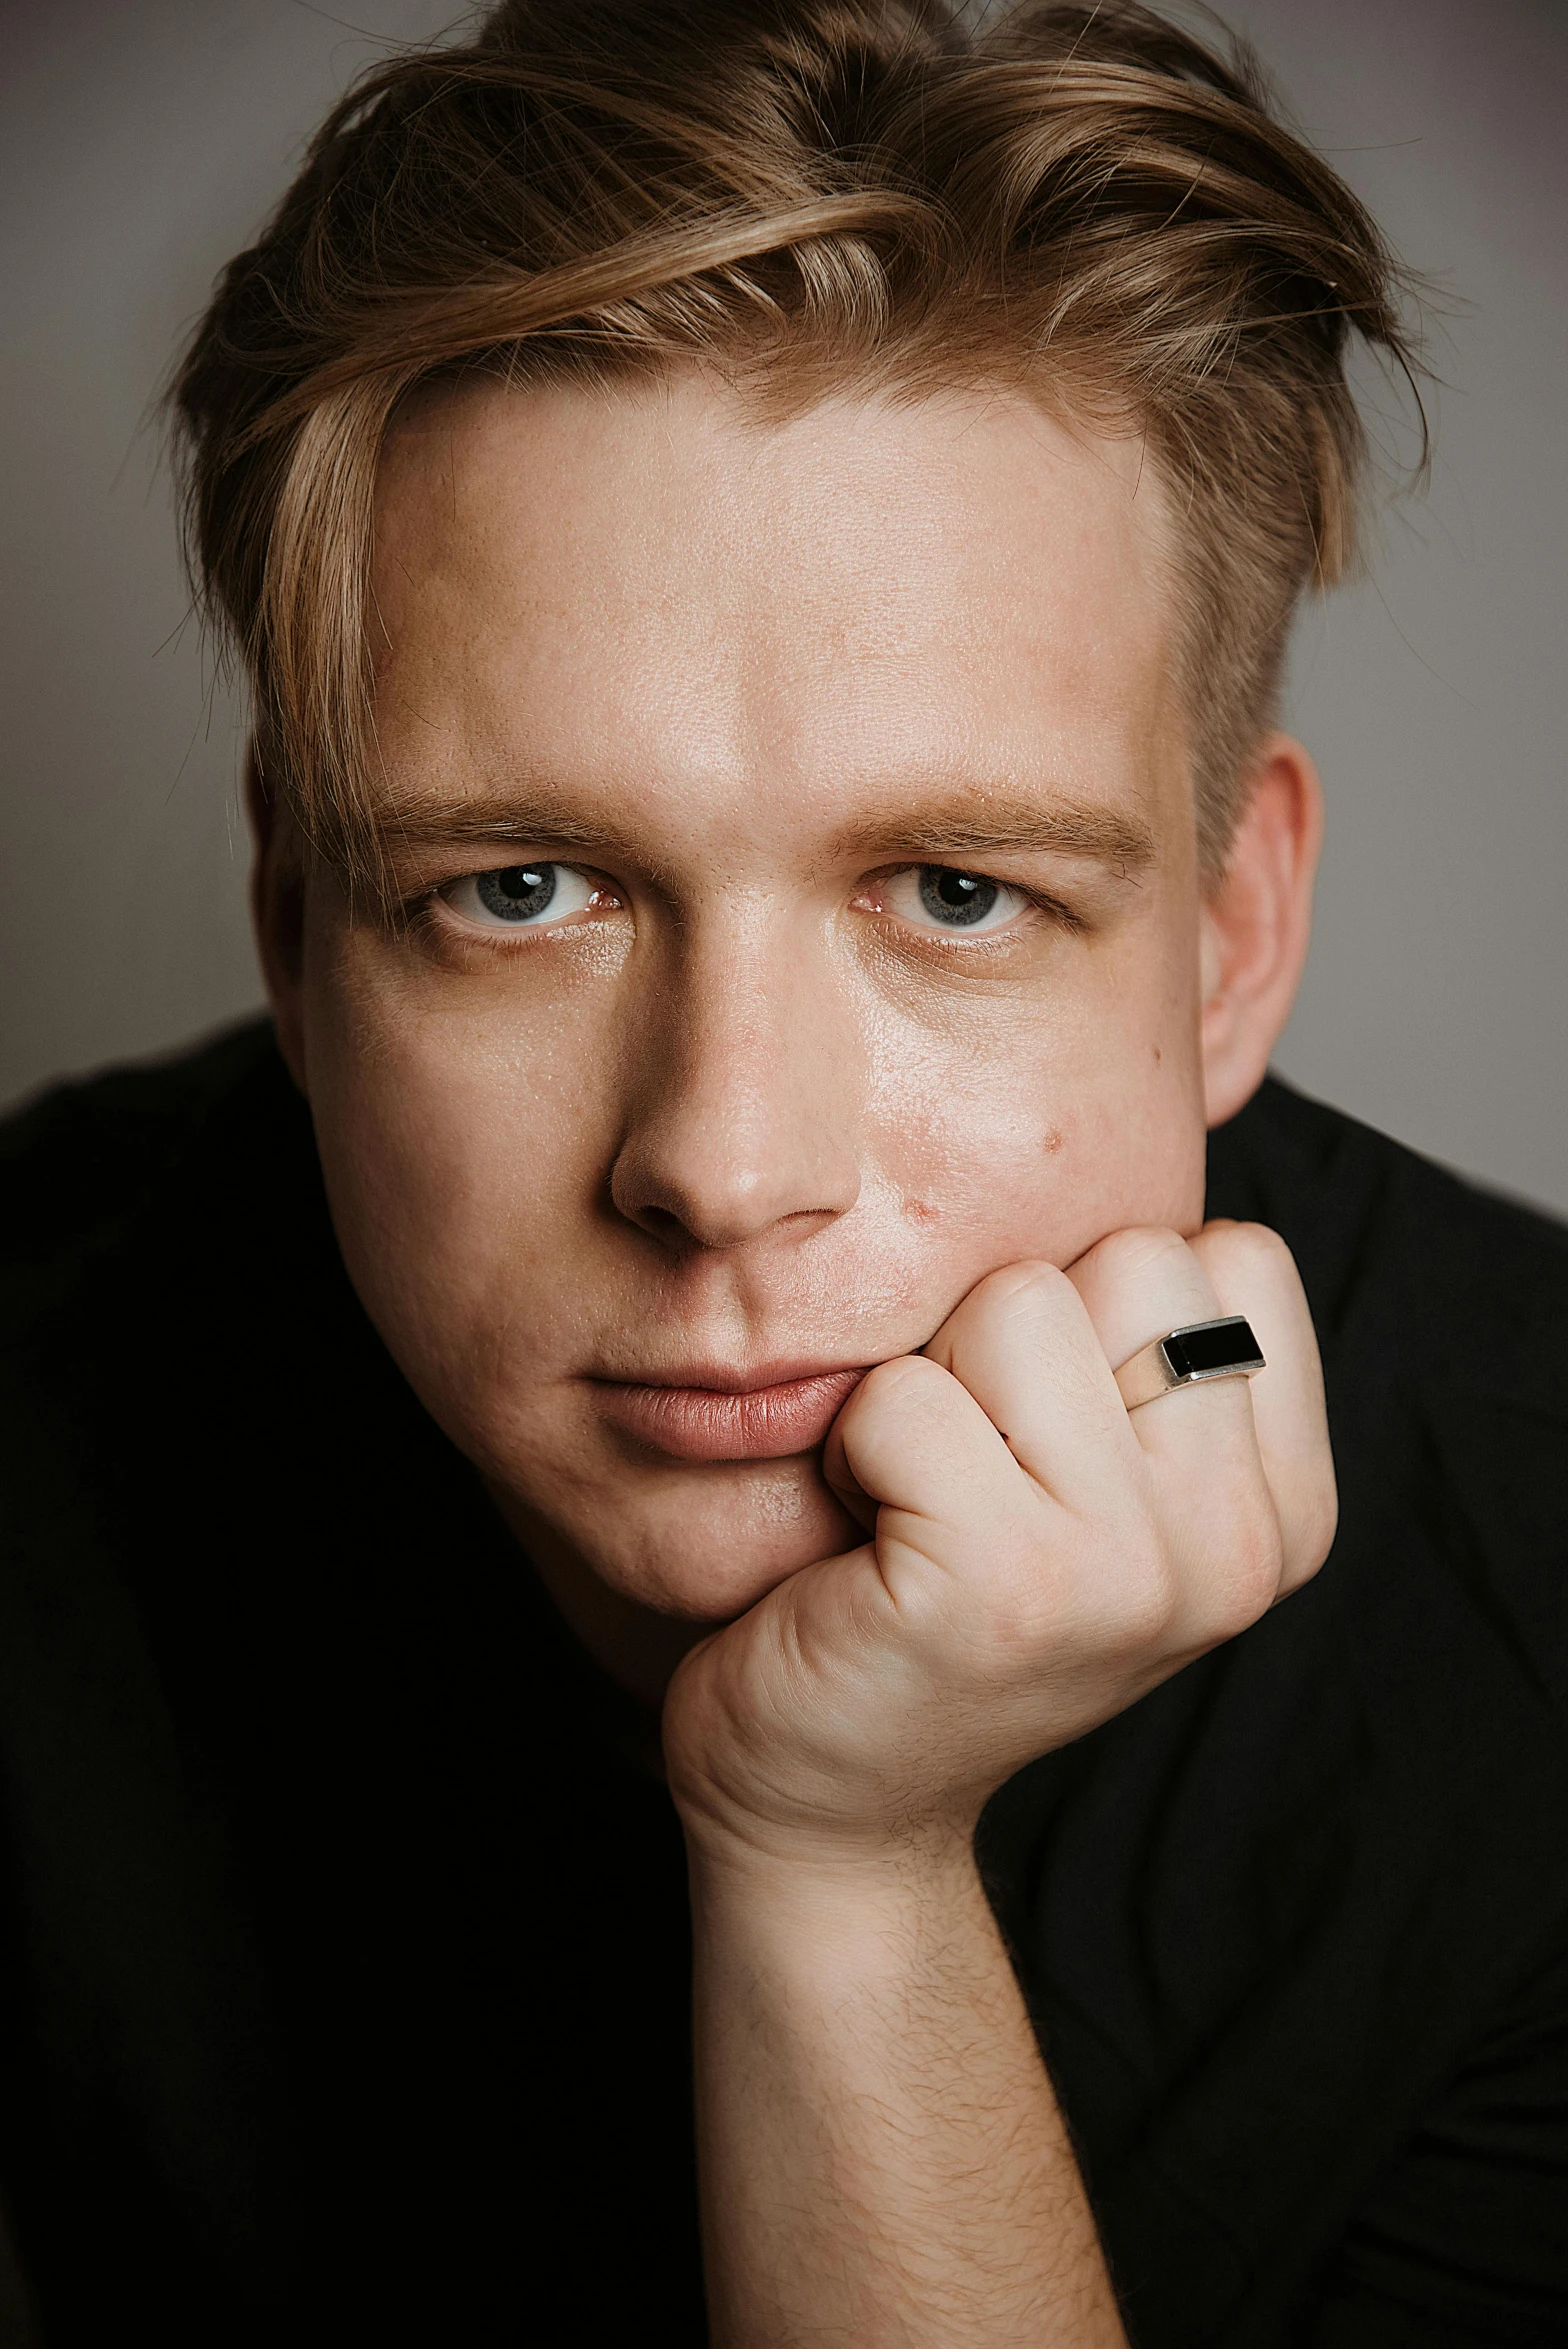 a man in a black shirt posing for a picture, an album cover, inspired by Oskar Lüthy, hand on his cheek, one man is blond, headshot profile picture, anton fadeev 8 k